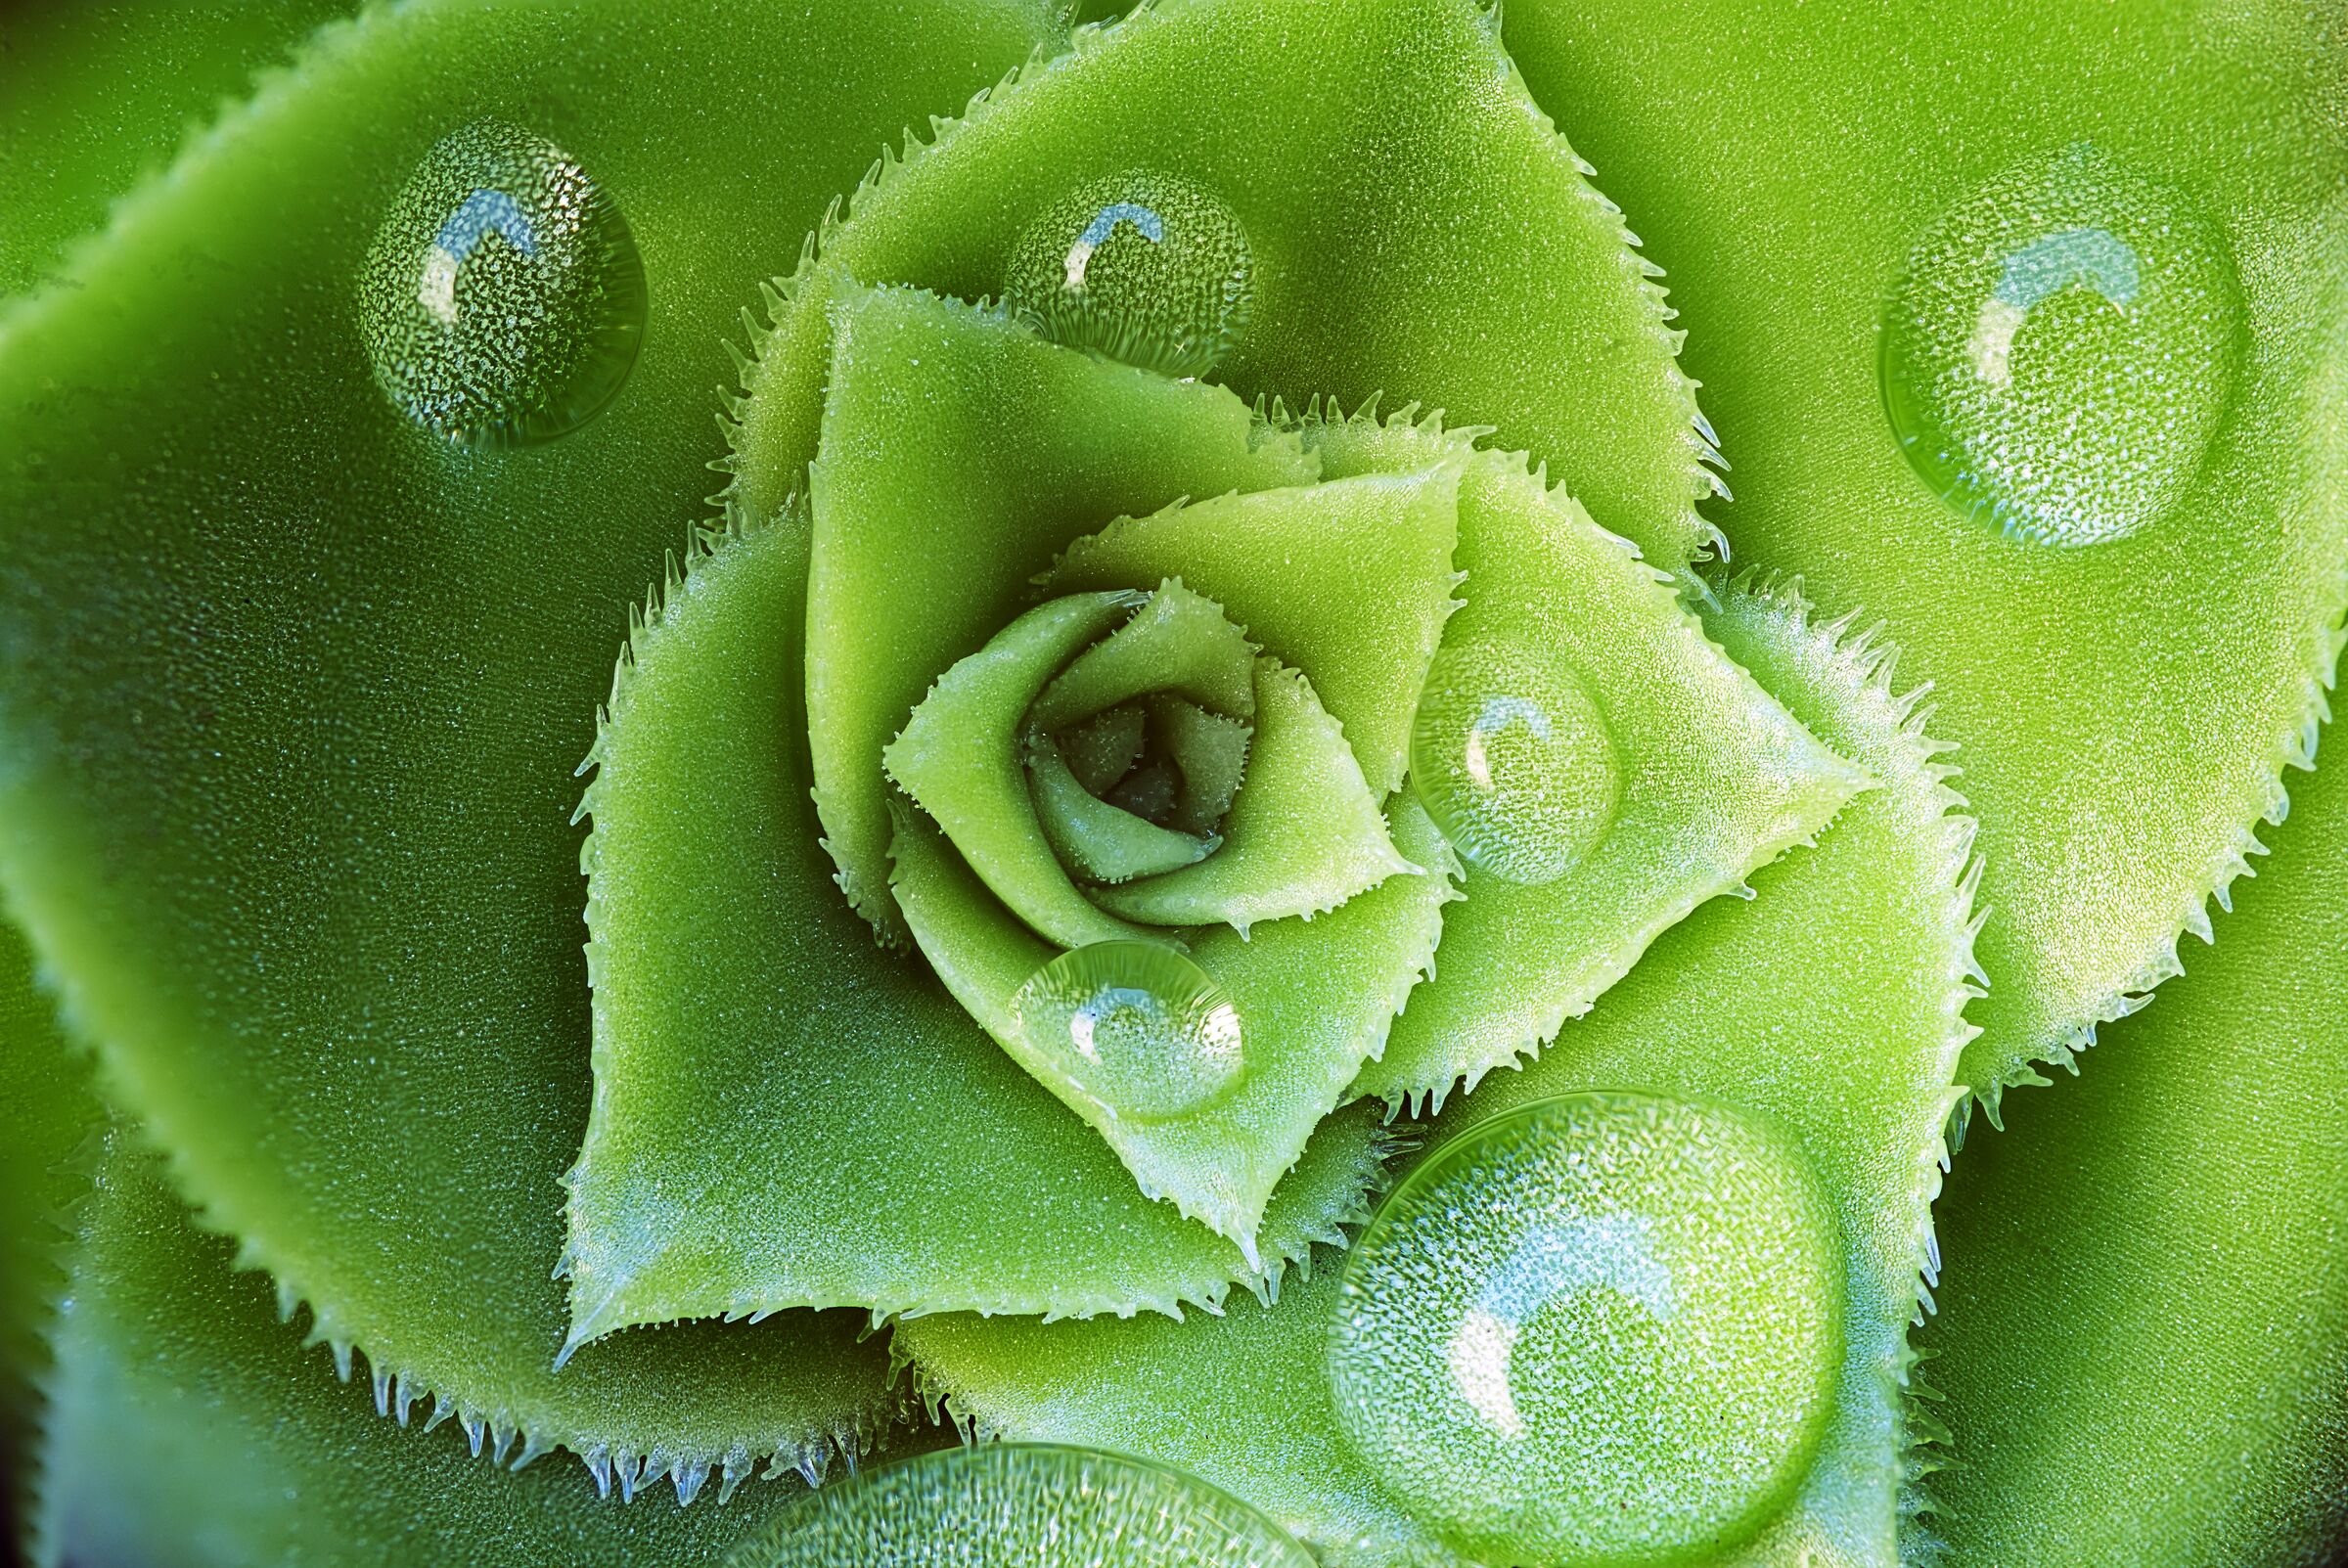 THE DETAIL OF A FLOWER...